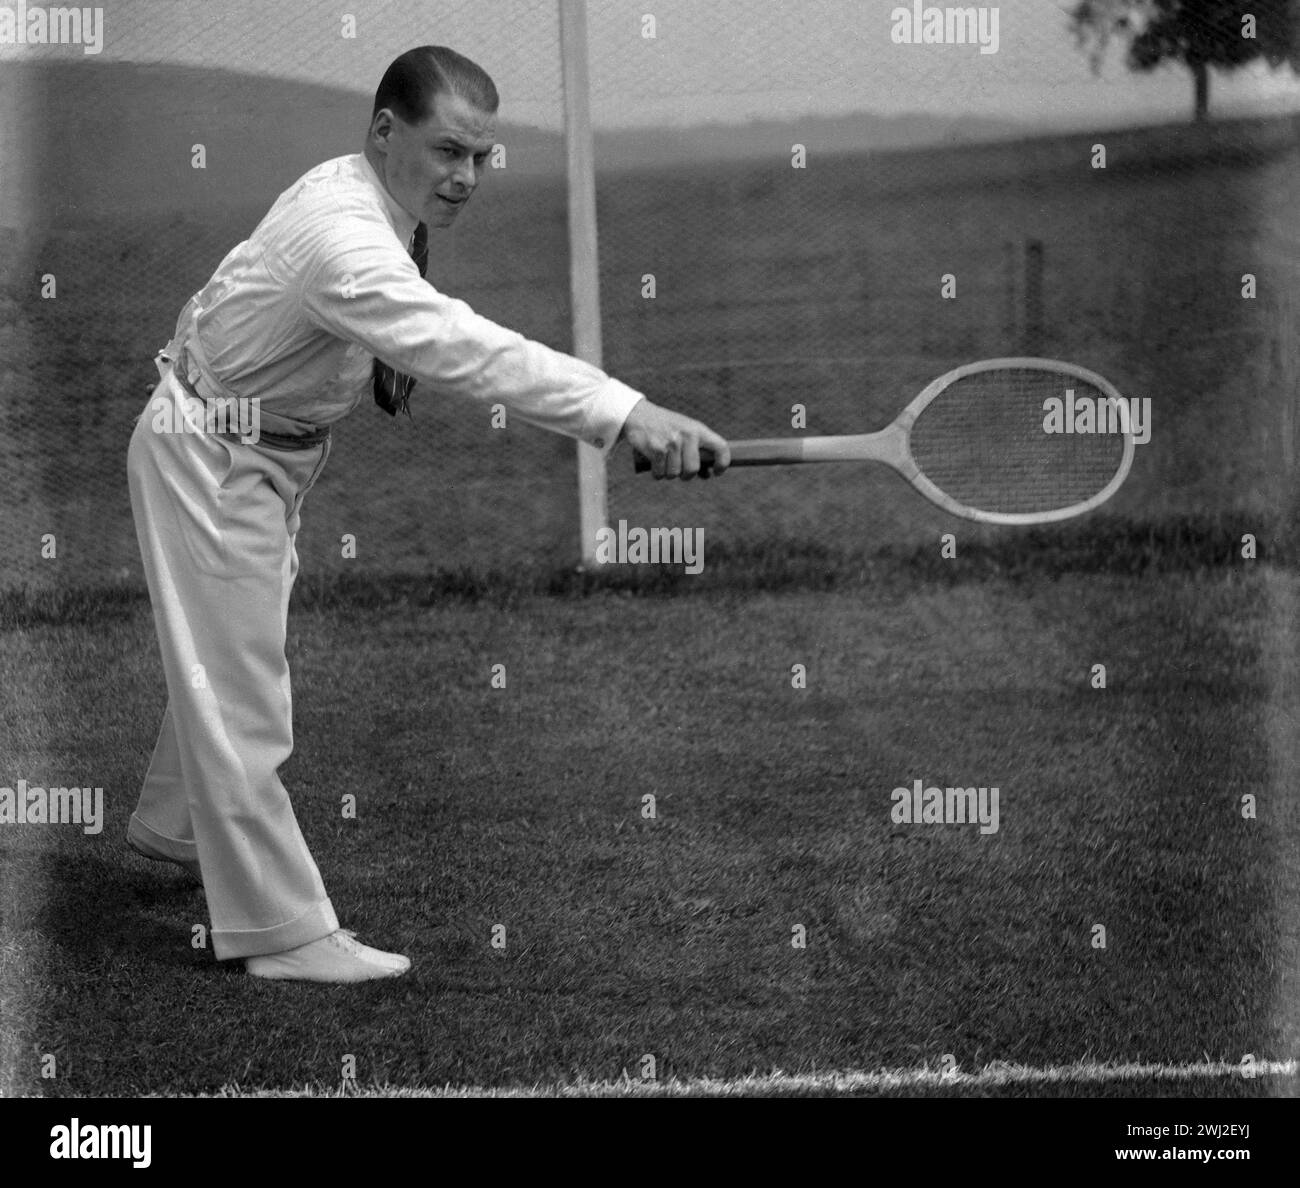 1920s, historical, outside on a grass tennis court, a gentleman tennis player in the stylish sporting dress of the era - long flannel trousers, long sleeve shirt & tie - playing a backhand holding a traditional wooden racquet, England, UK. Stock Photo